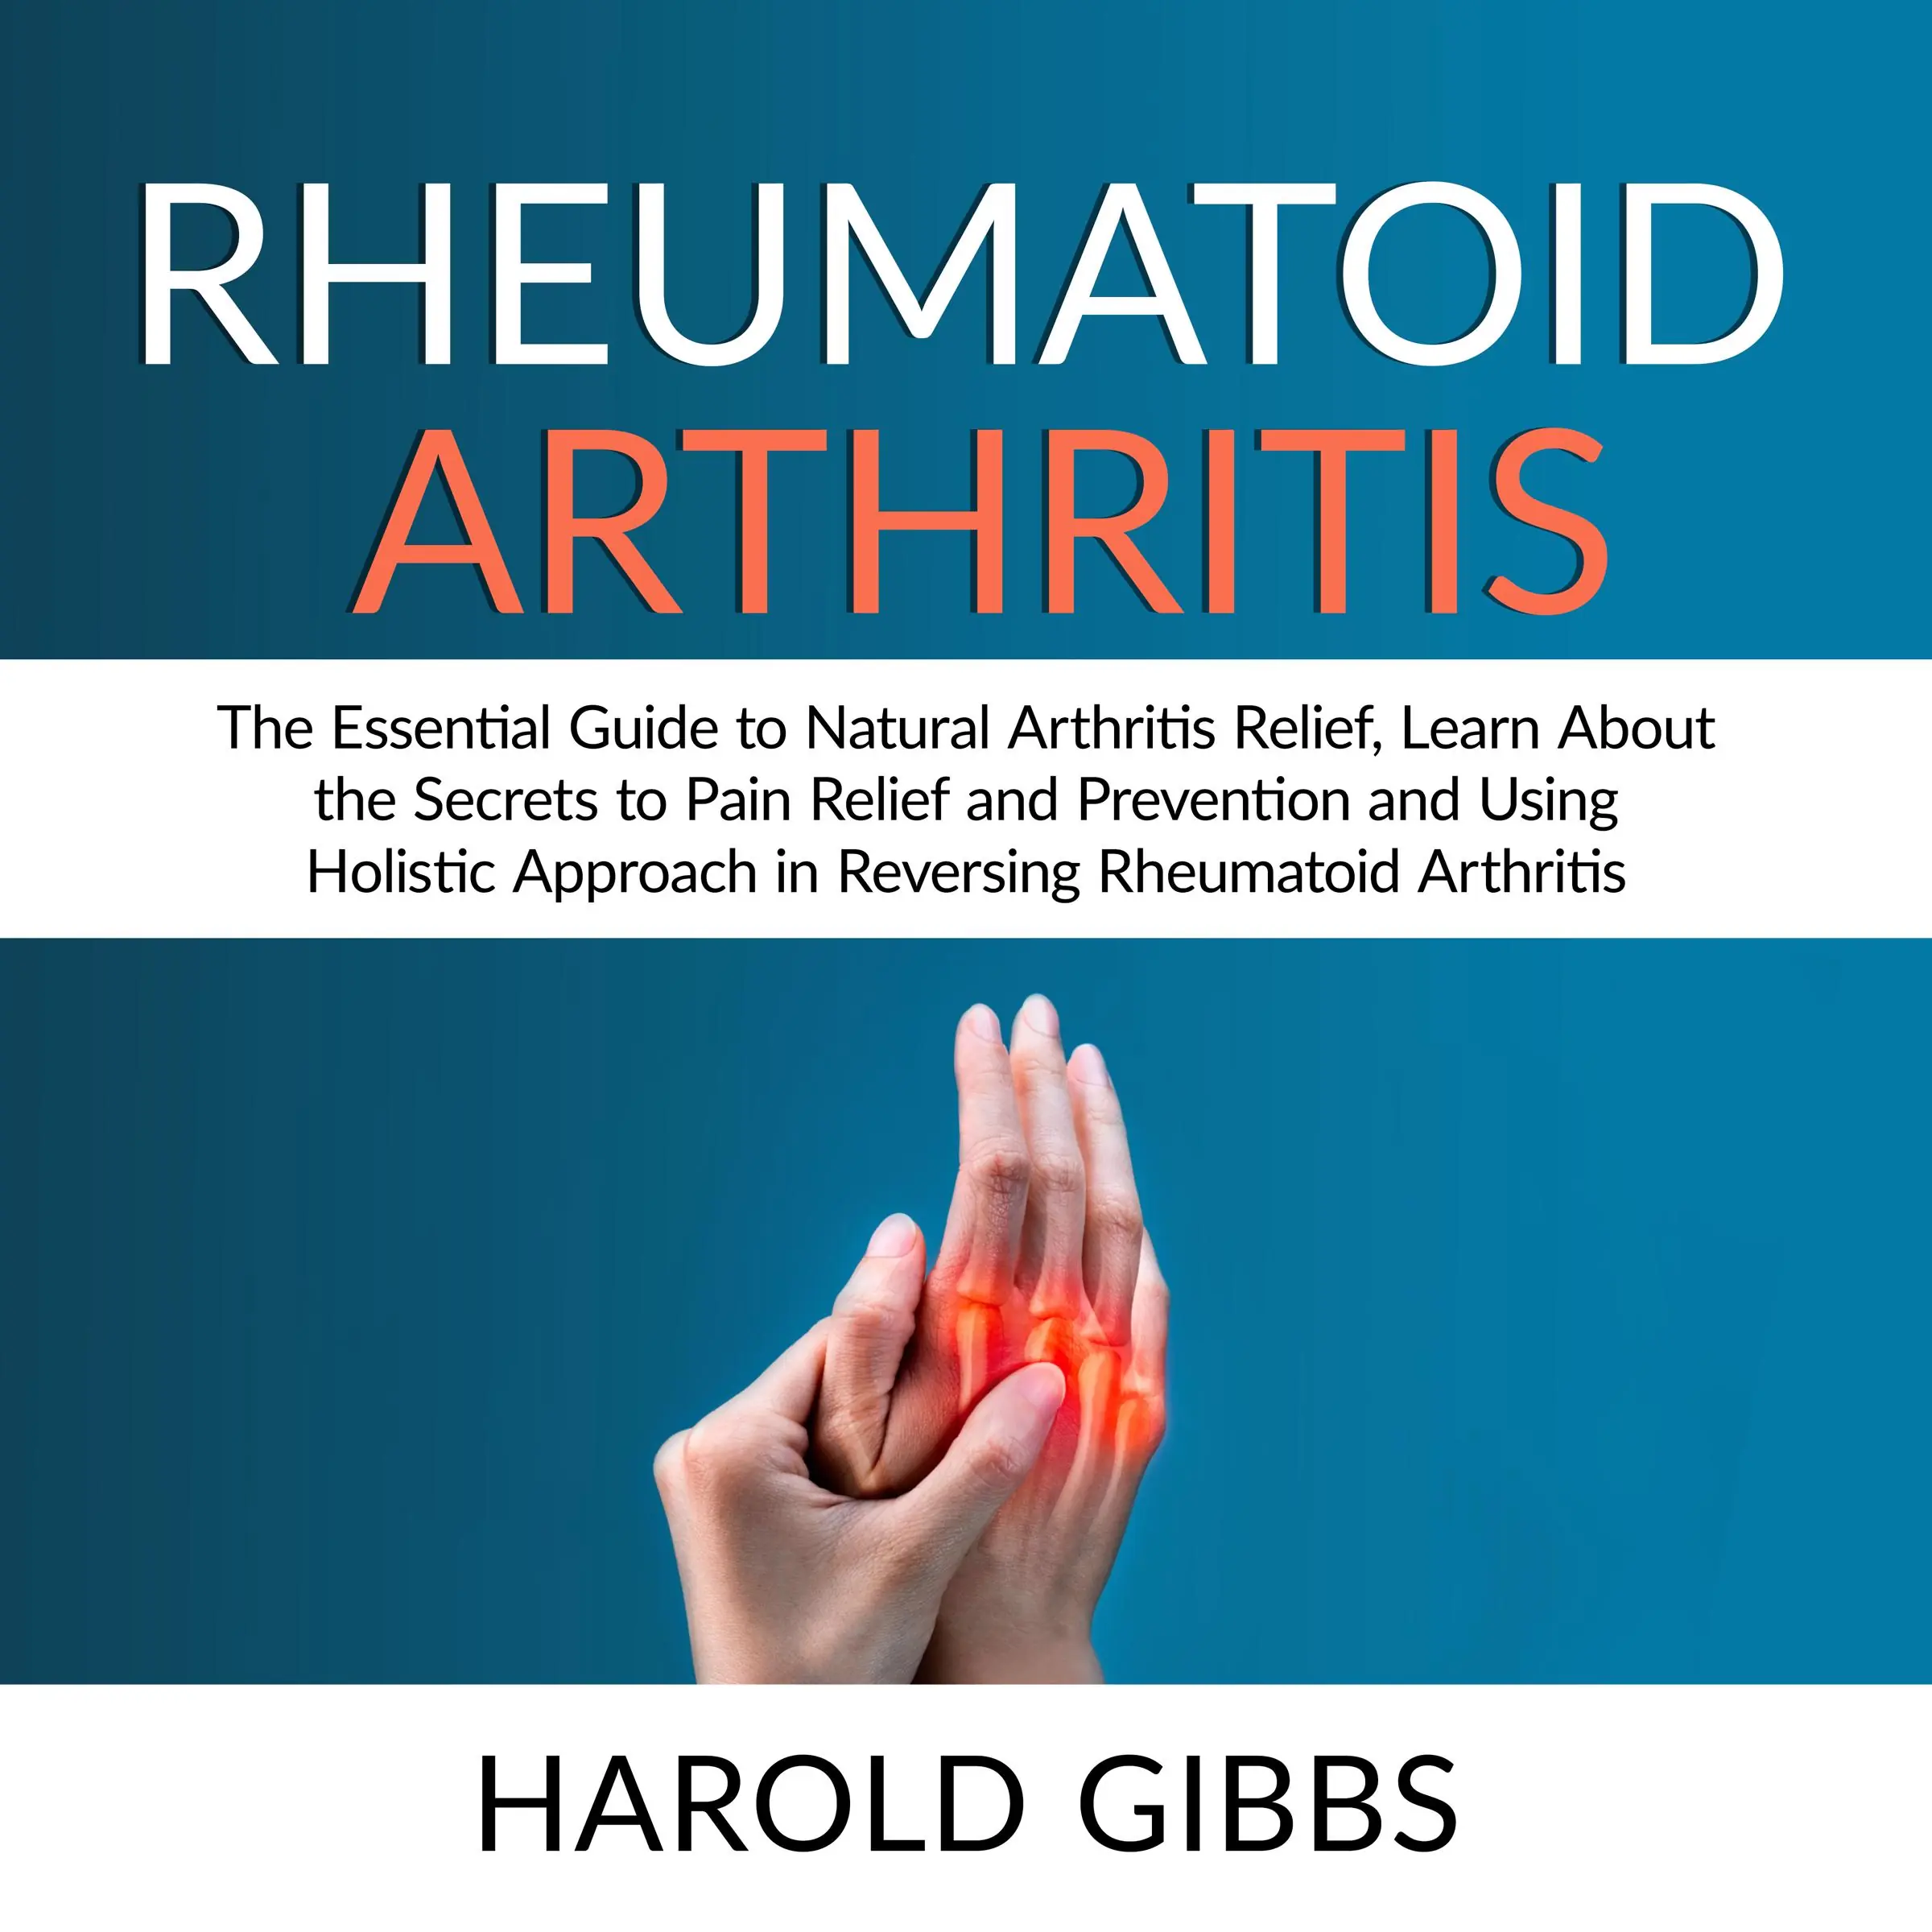 Rheumatoid Arthritis: The Essential Guide to Natural Arthritis Relief, Learn About the Secrets to Pain Relief and Prevention and Using Holistic Approach in Reversing Rheumatoid Arthritis Audiobook by Harold Gibbs